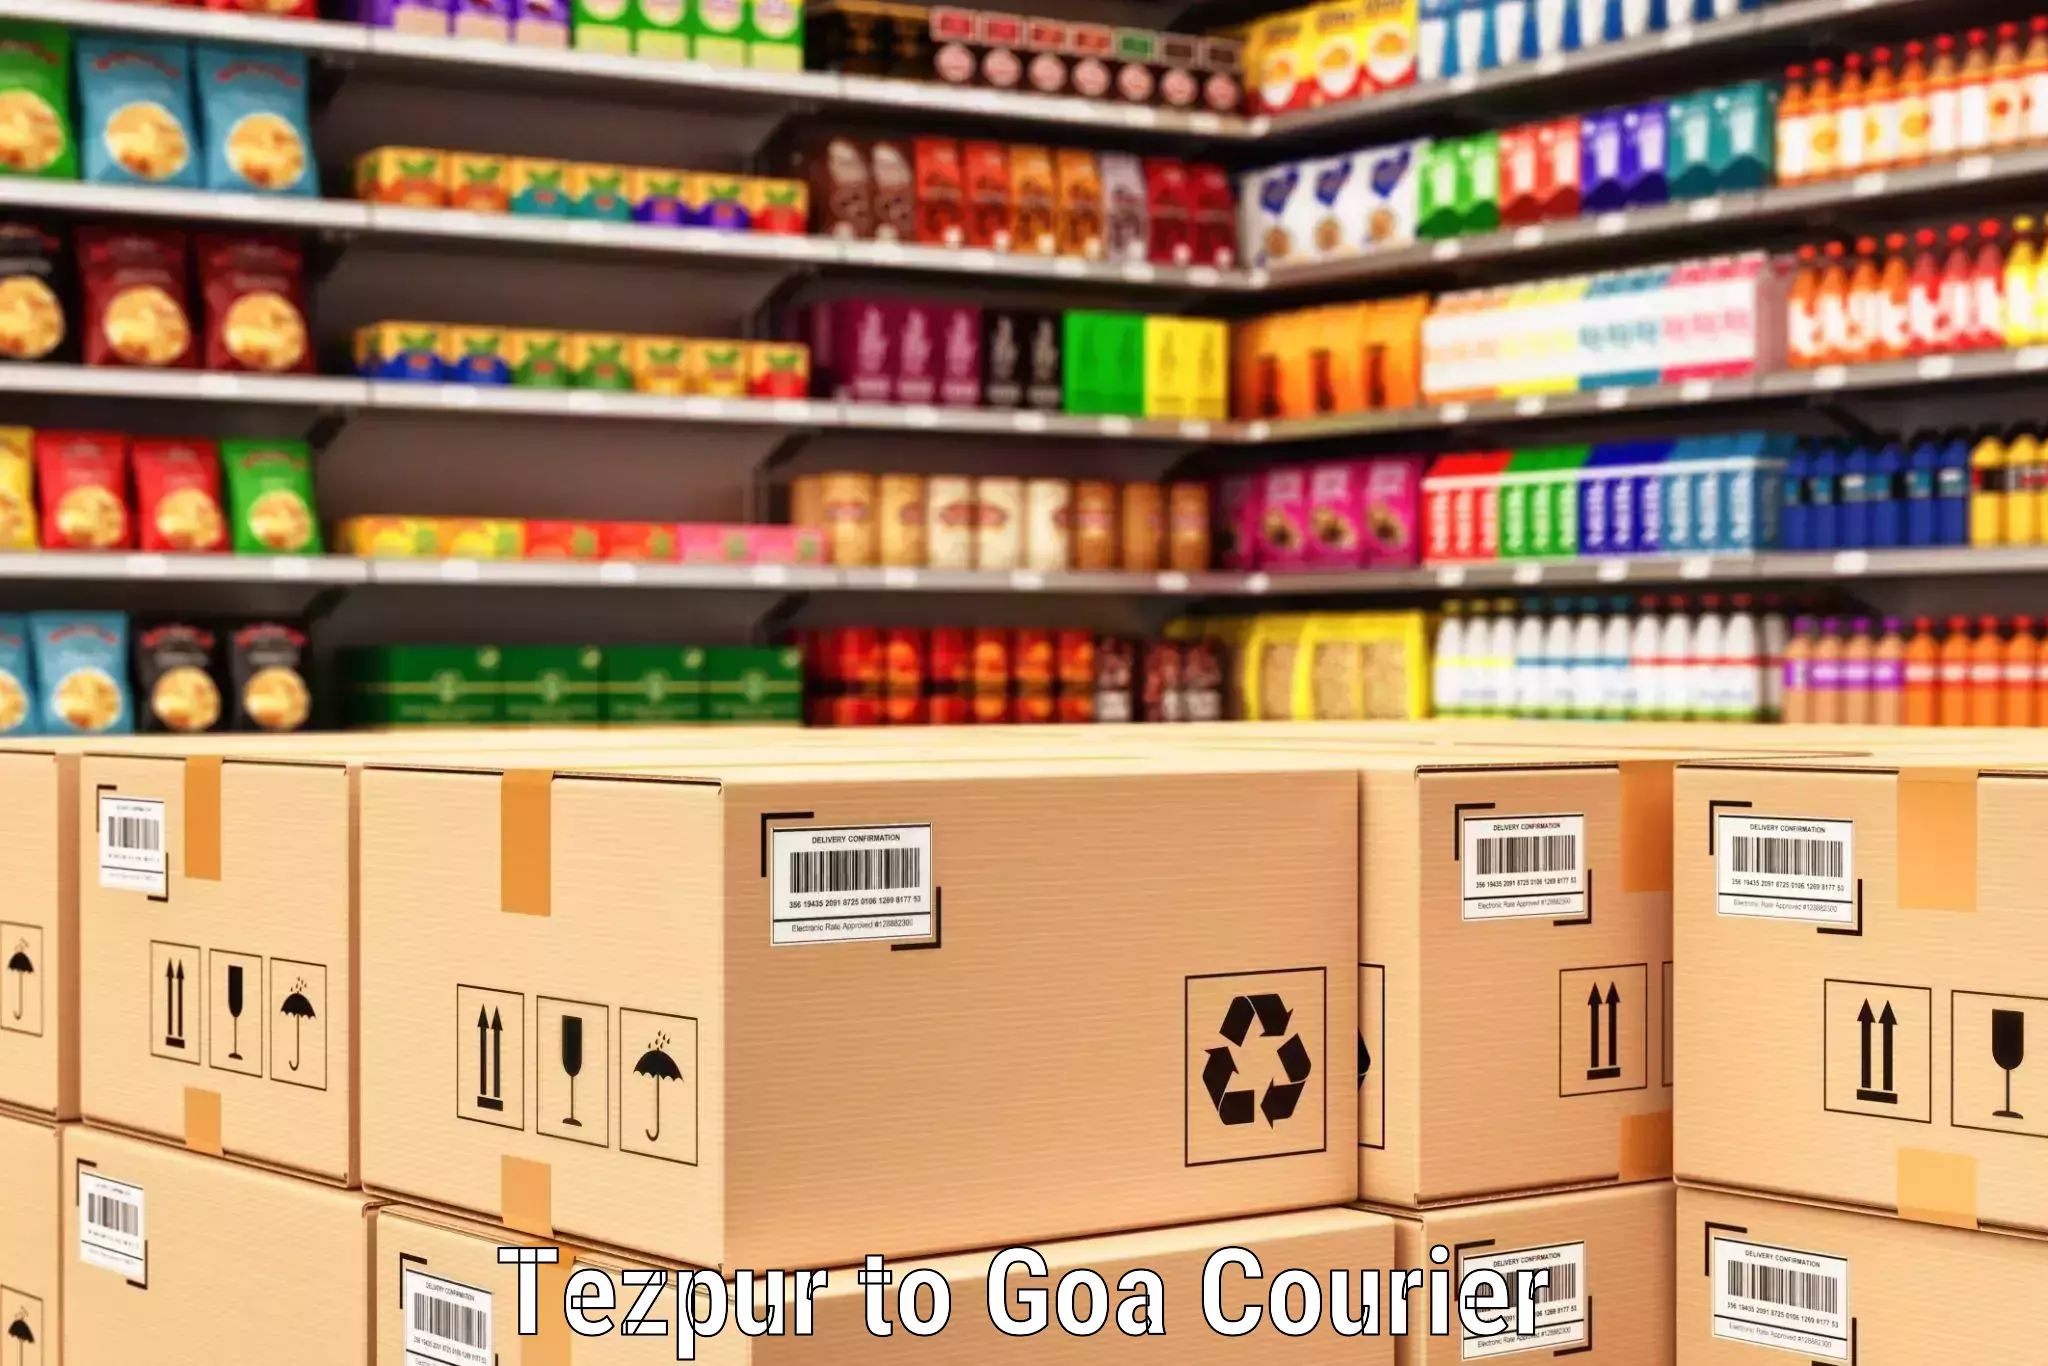 Global courier networks Tezpur to Goa